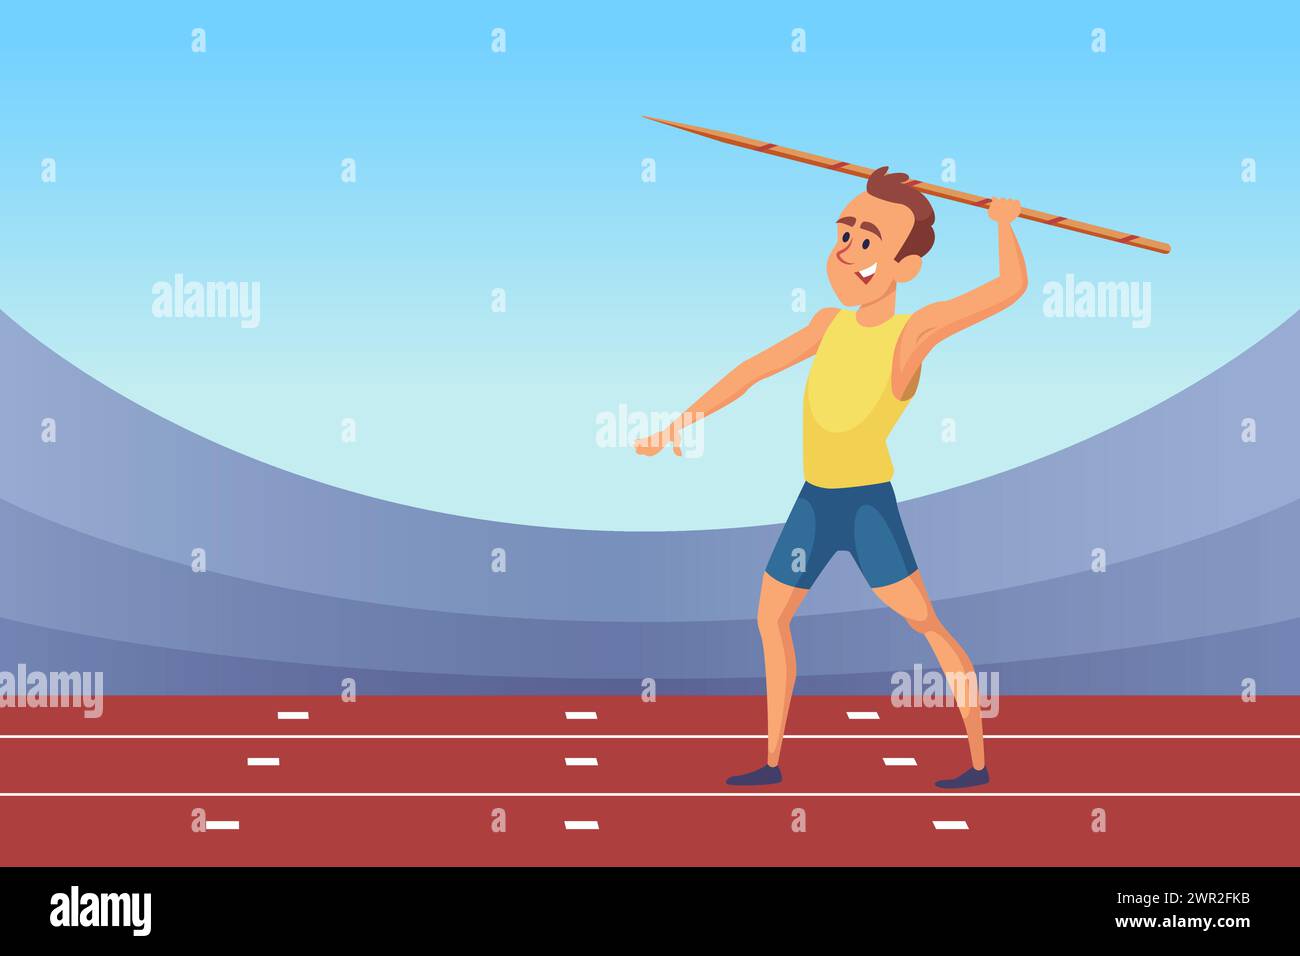 Javelin throwing olympic sport game man holding spear Stock Vector